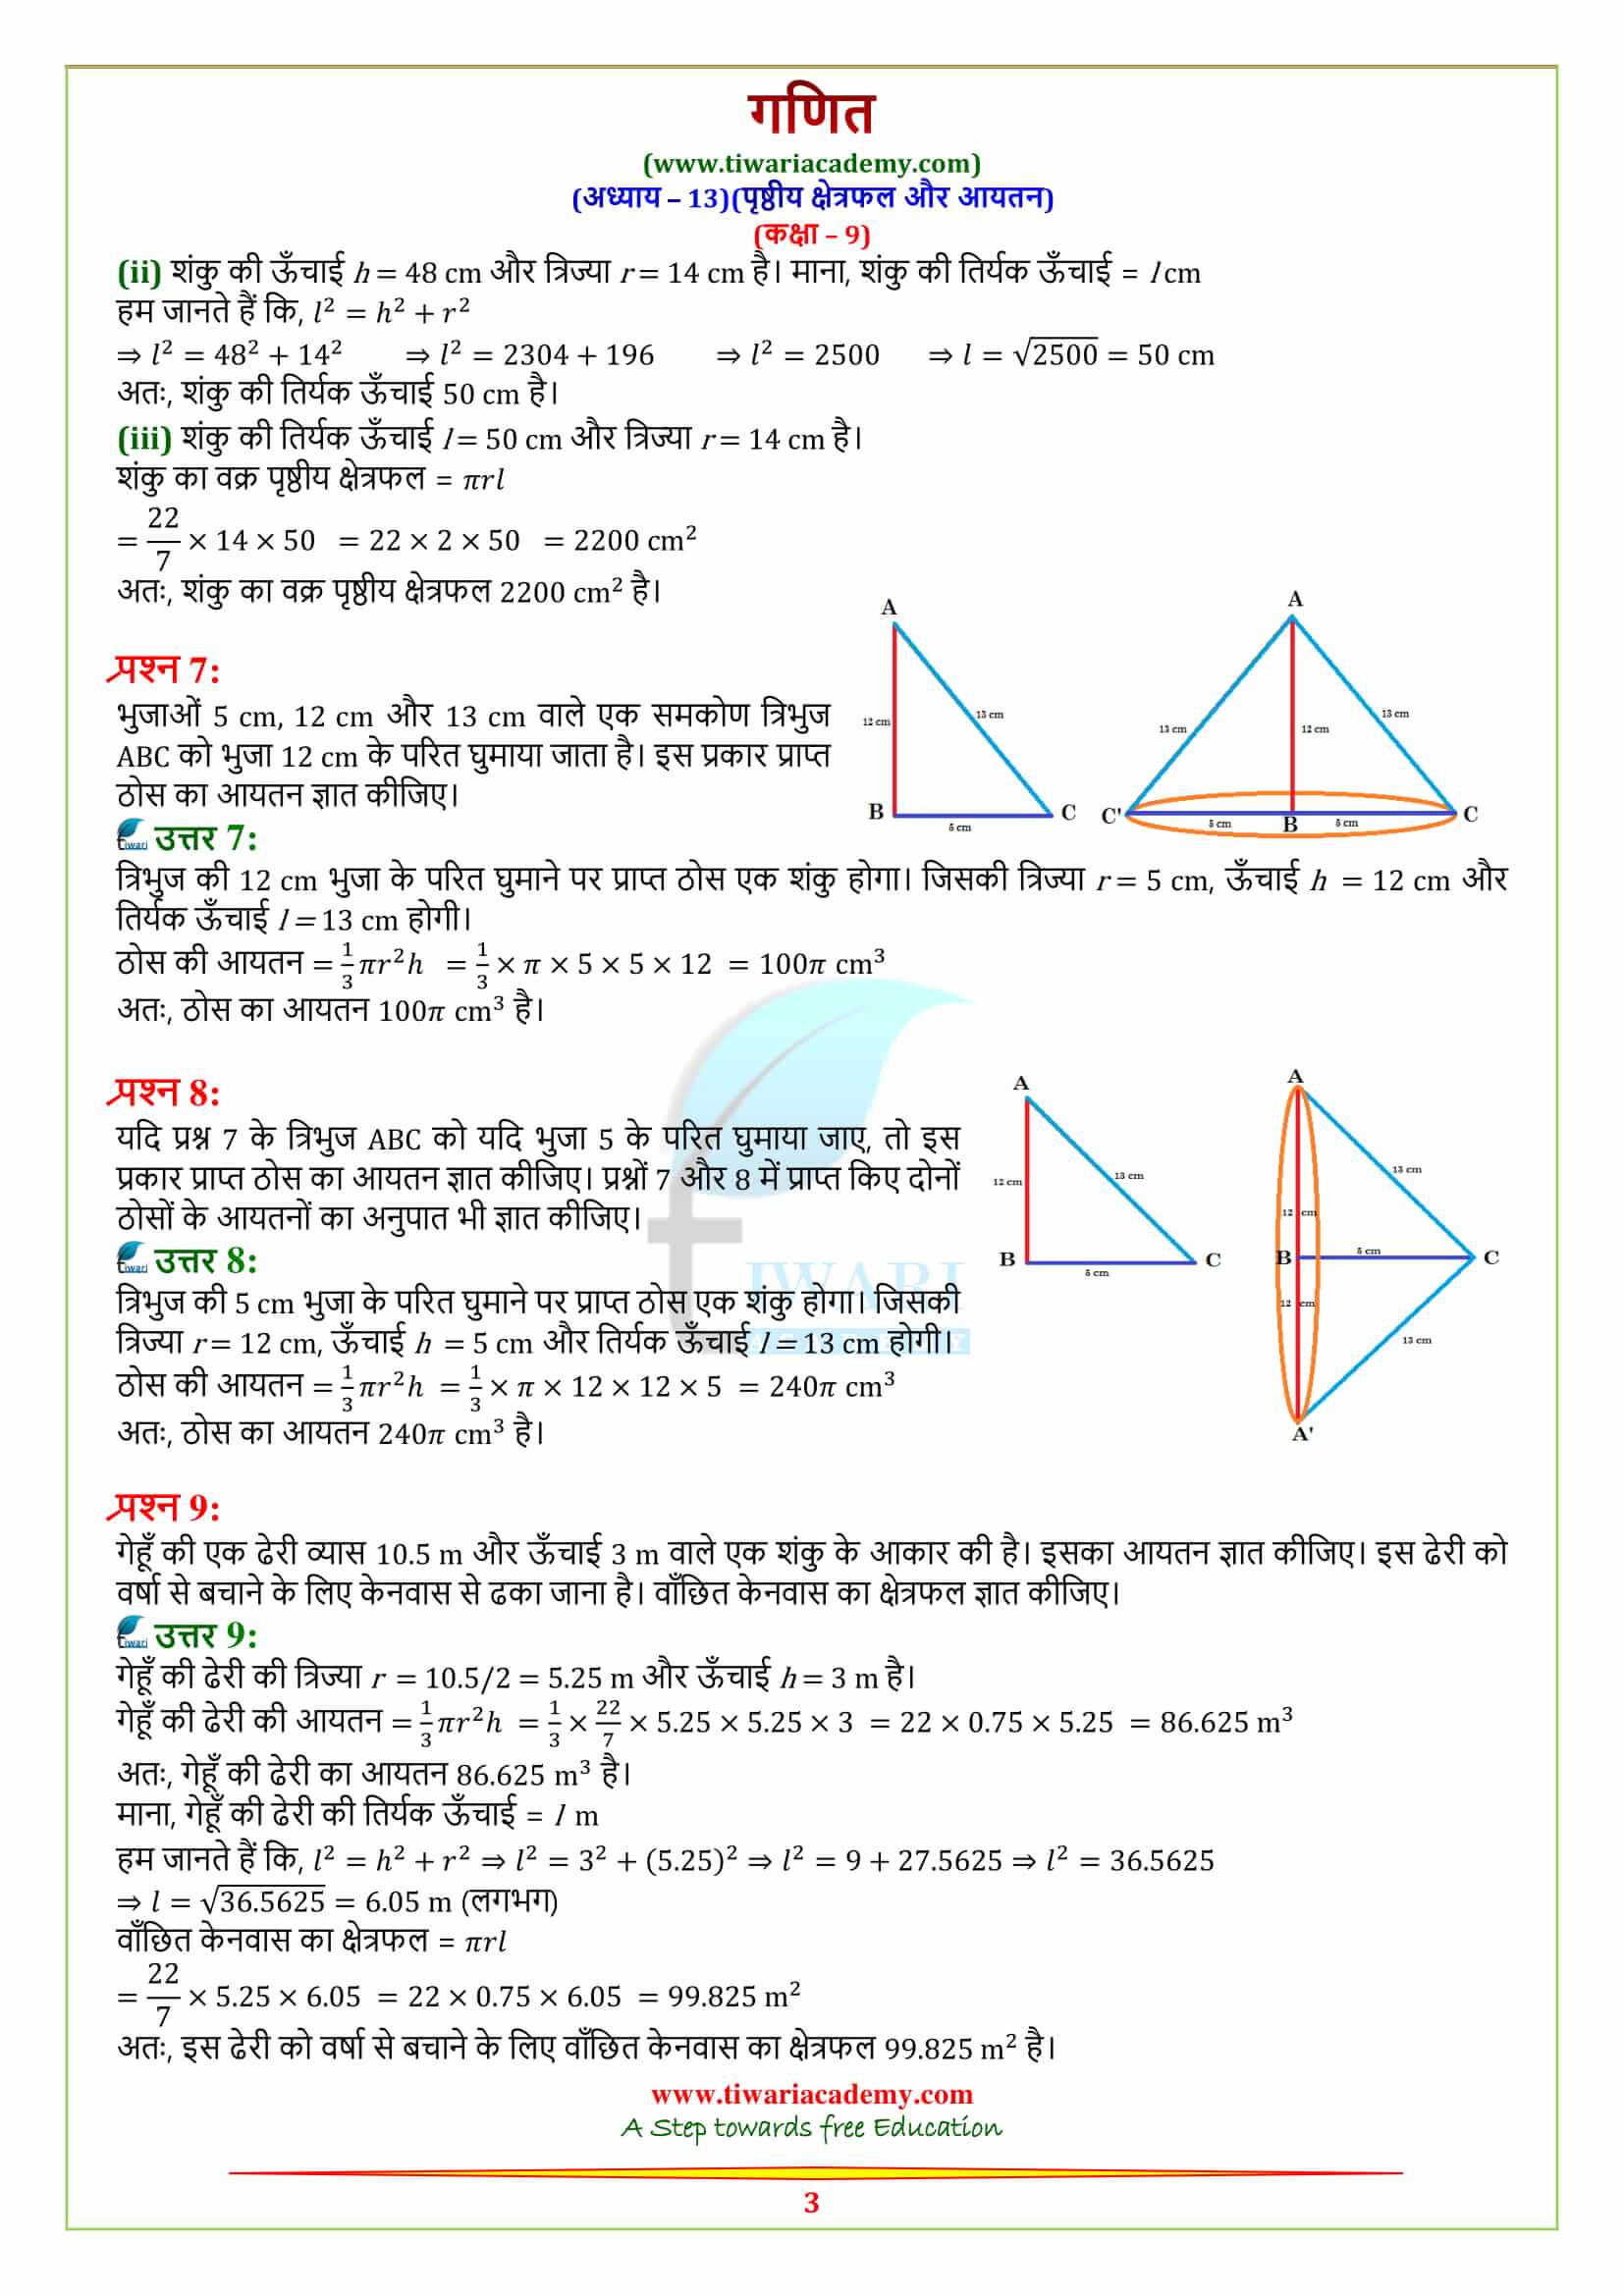 Class 9 Maths Chapter 13 Exercise 13.7 sols in pdf form free